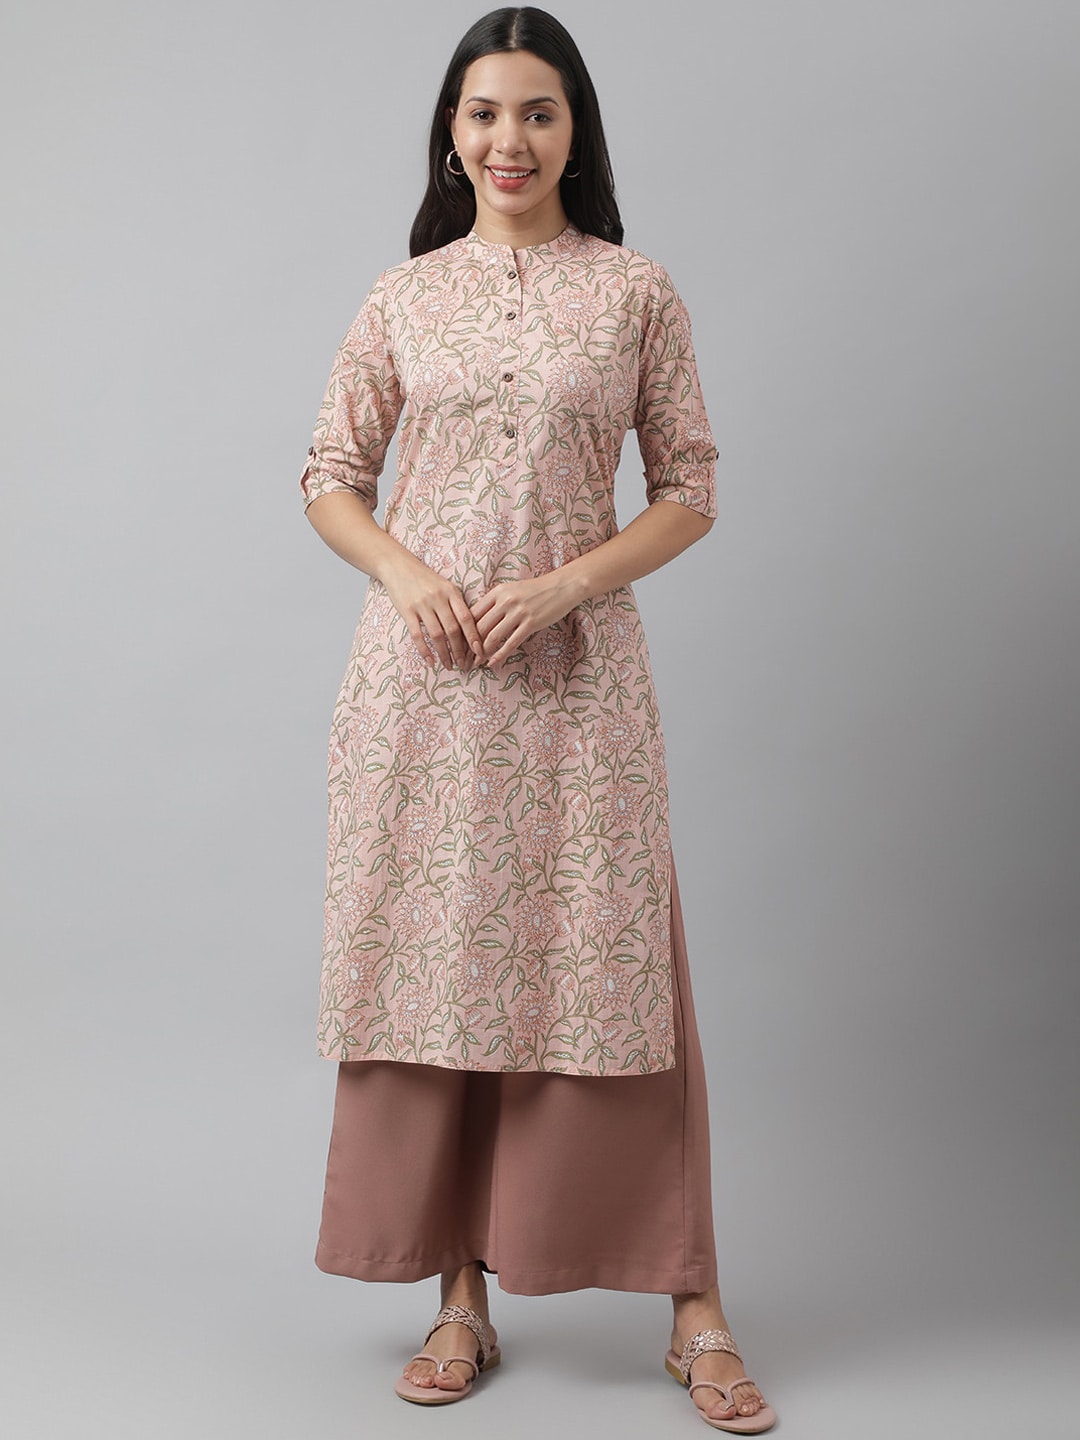 Divena Floral Printed Roll-Up Sleeves Cotton Kurta Price in India